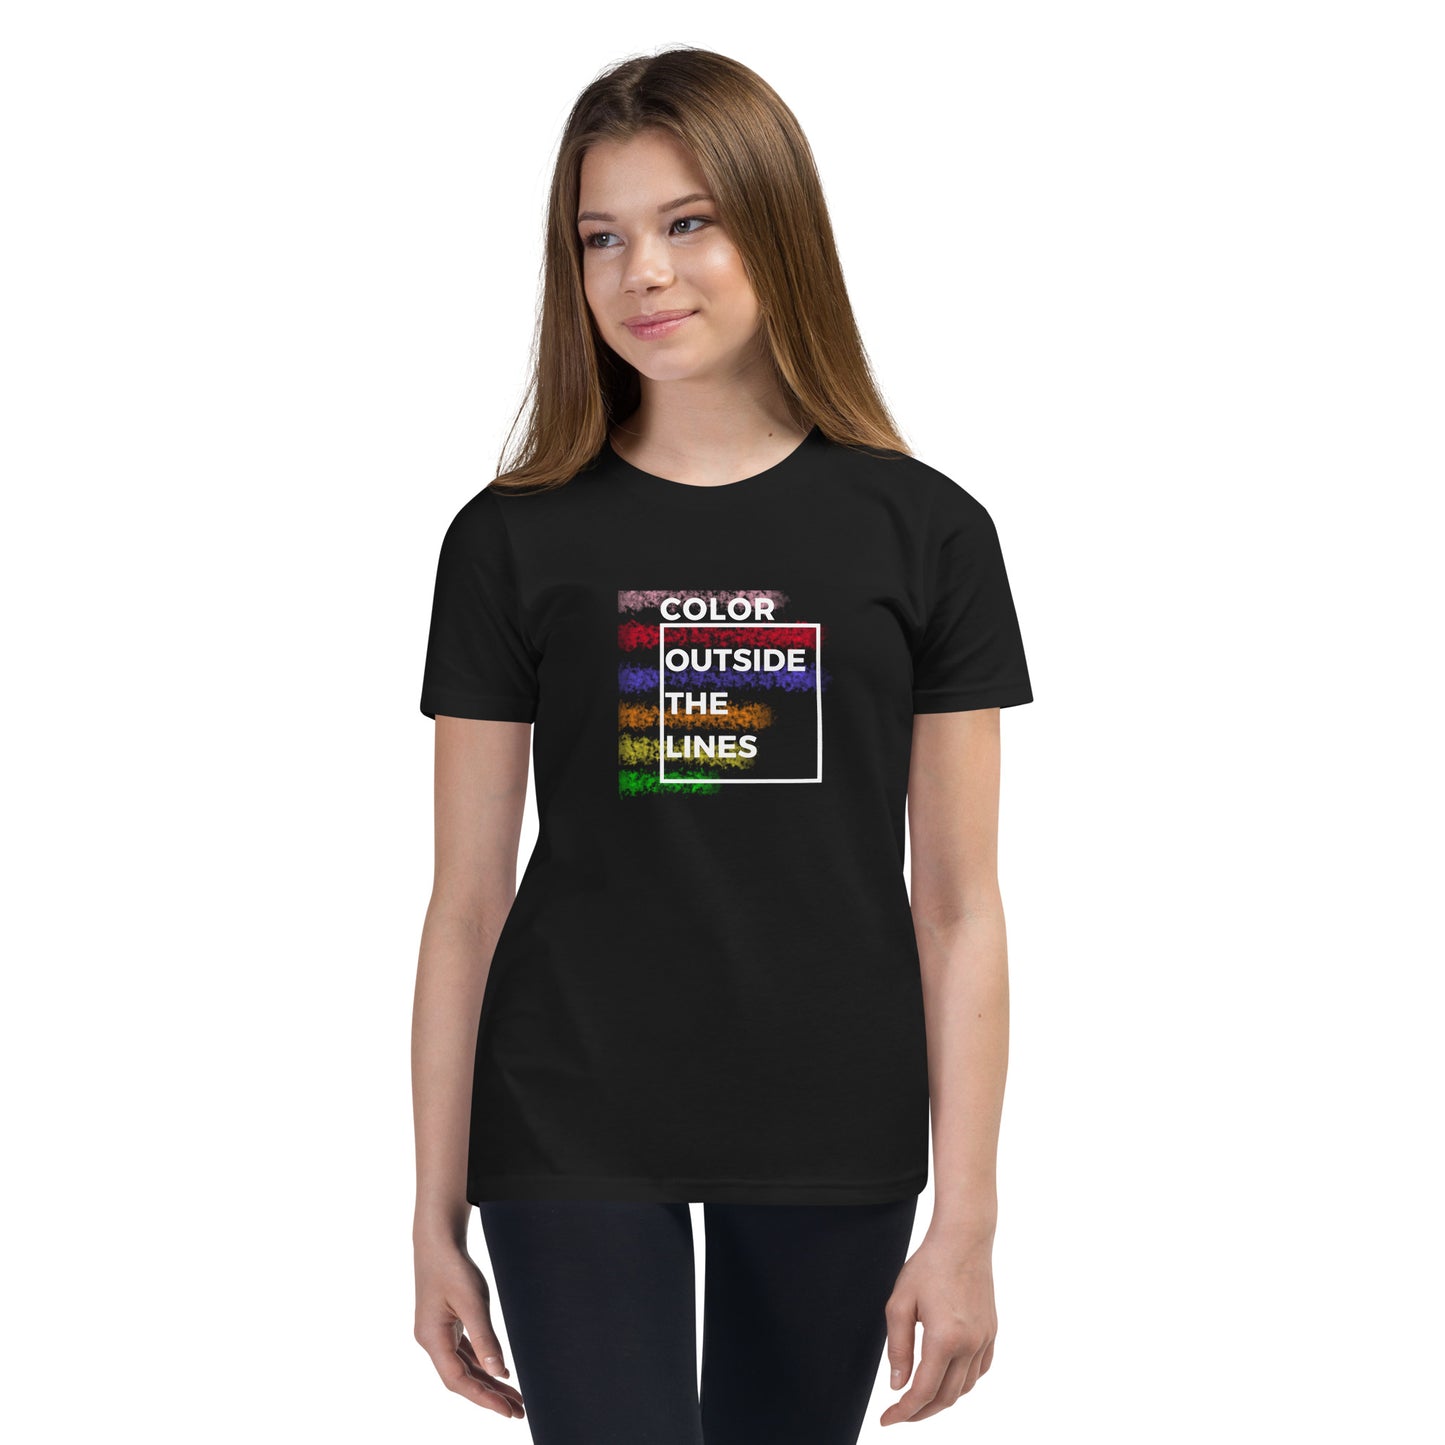 Color Outside The Lines - Youth Black Short Sleeve Tee Shirt